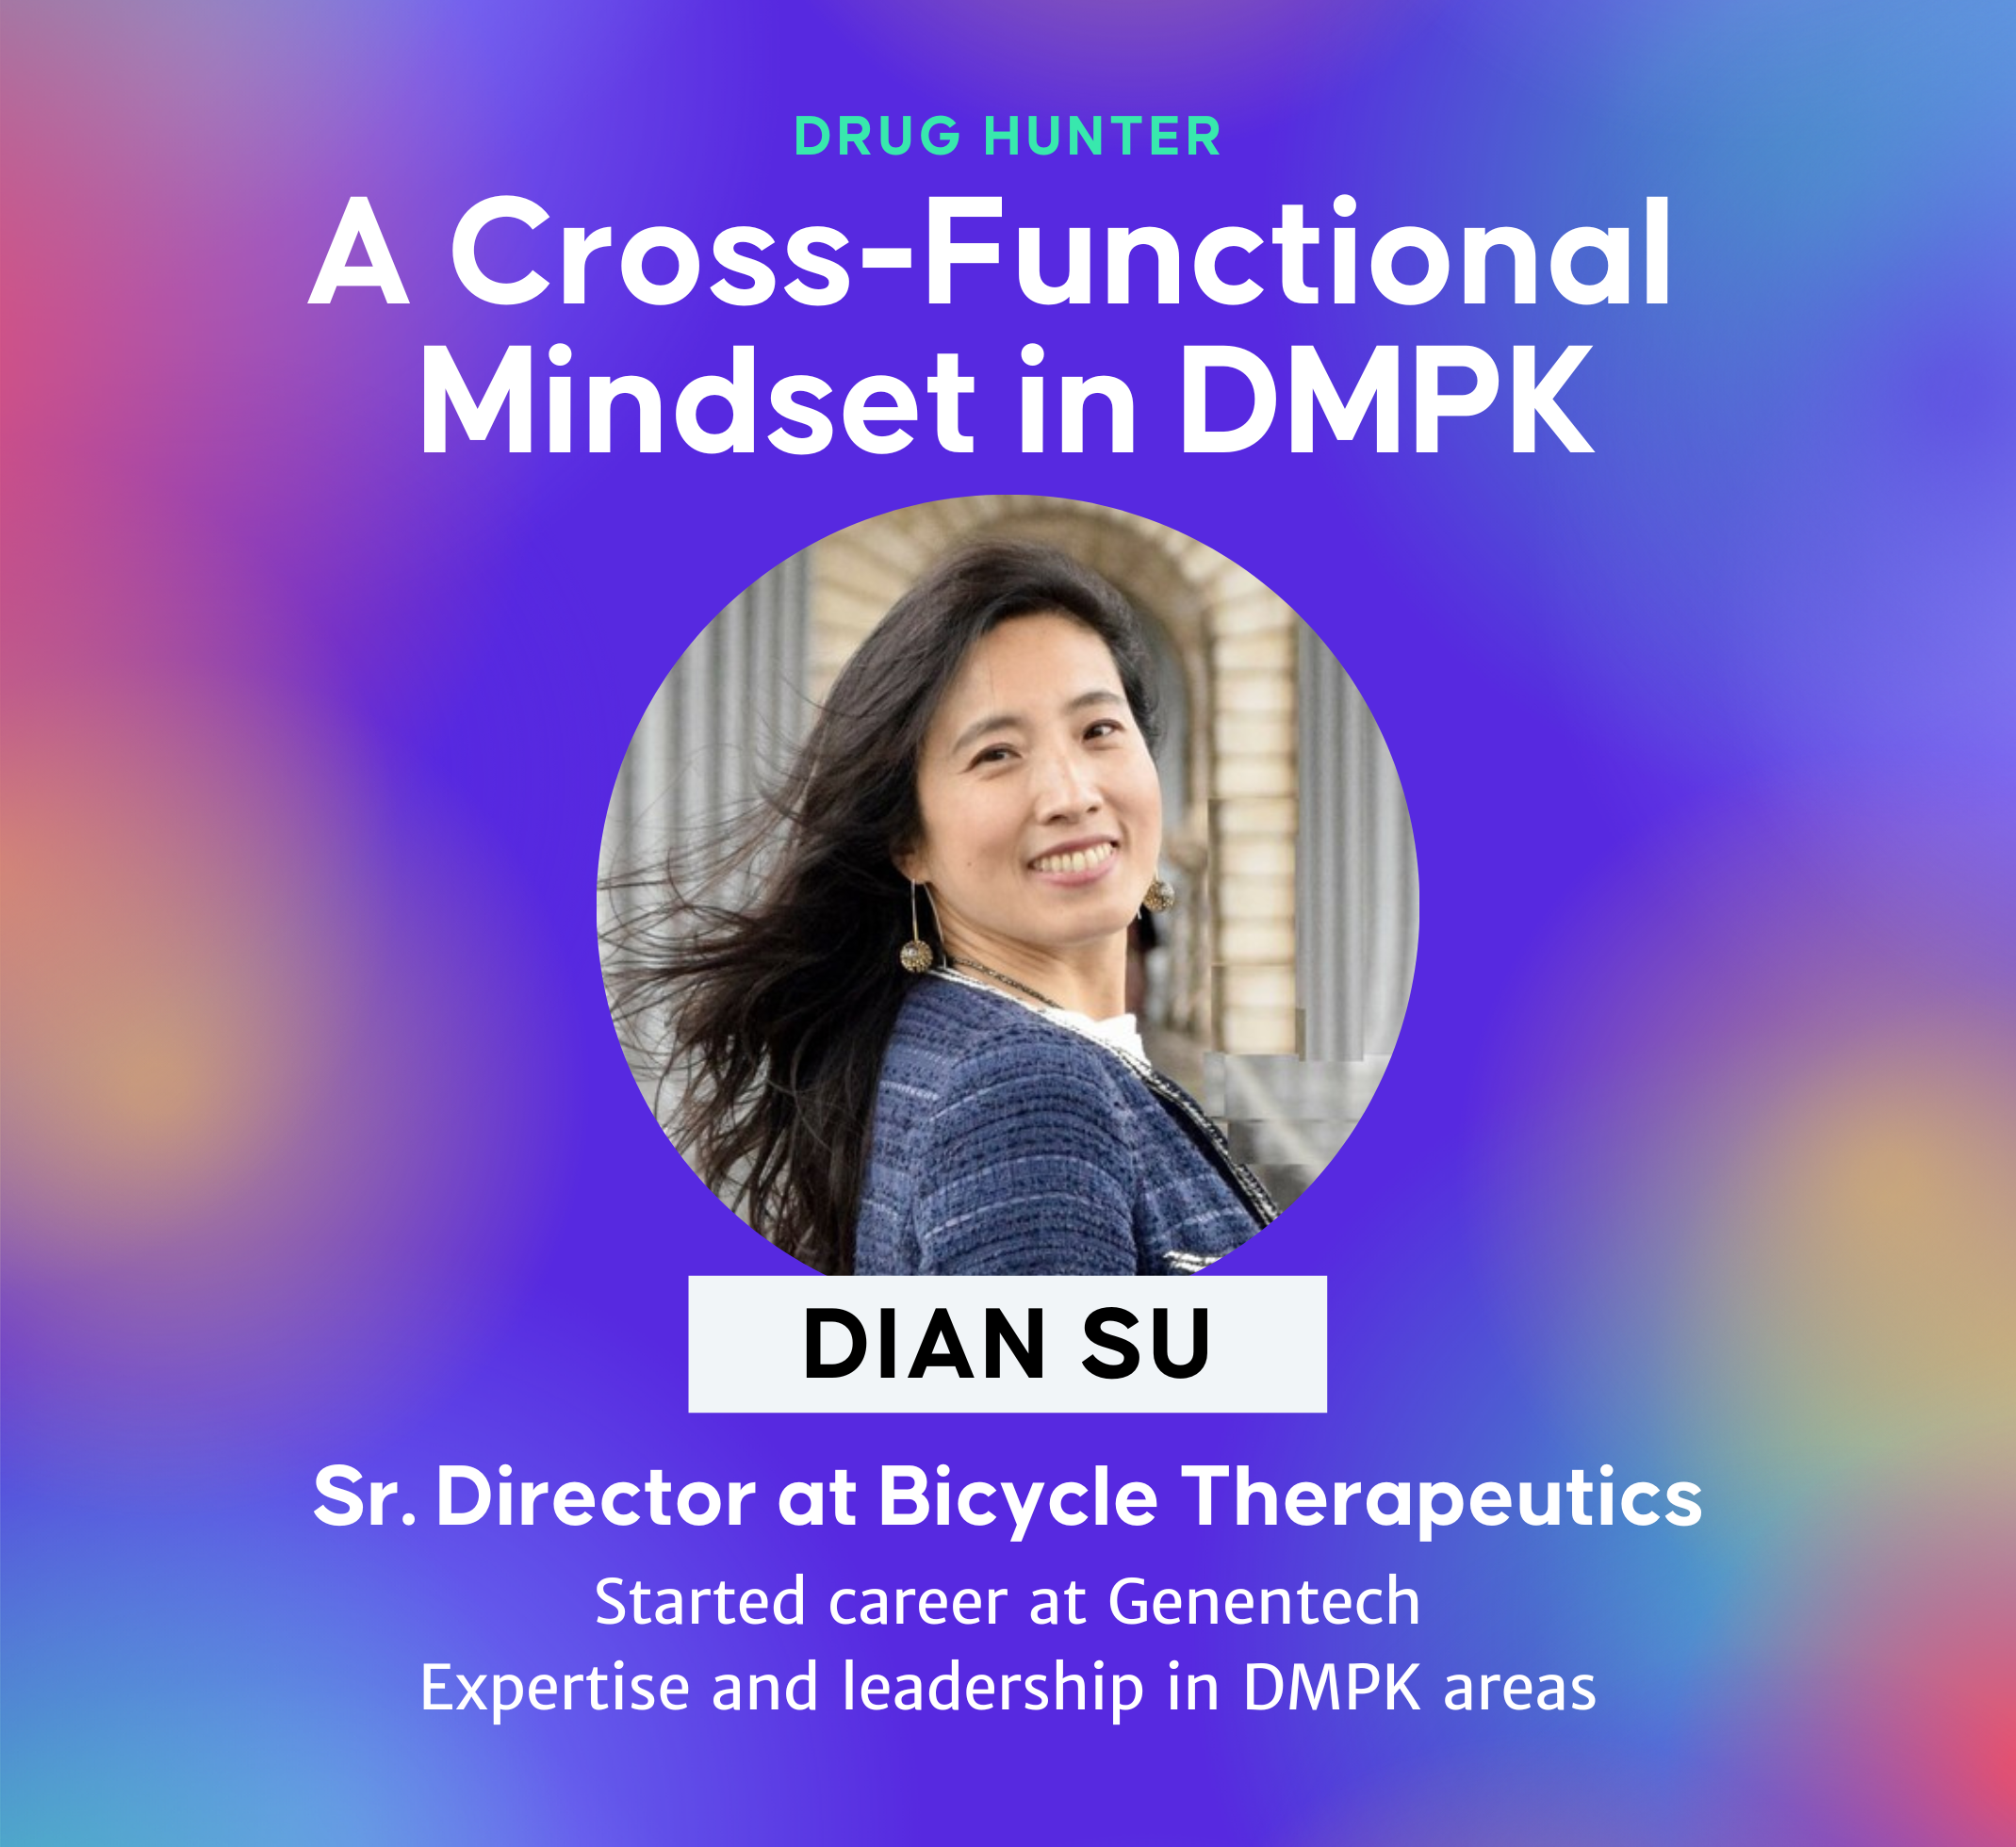 A Cross-Functional Mindset in DMPK - Dian Su, Sr Director at Bicycle Therapeutics, Started career at Genentech Expertise and leadership in DMPK areas||A Cross-Functional Mindset in DMPK - Dian Su, Sr Director at Bicycle Therapeutics, Started career at Genentech Expertise and leadership in DMPK areas